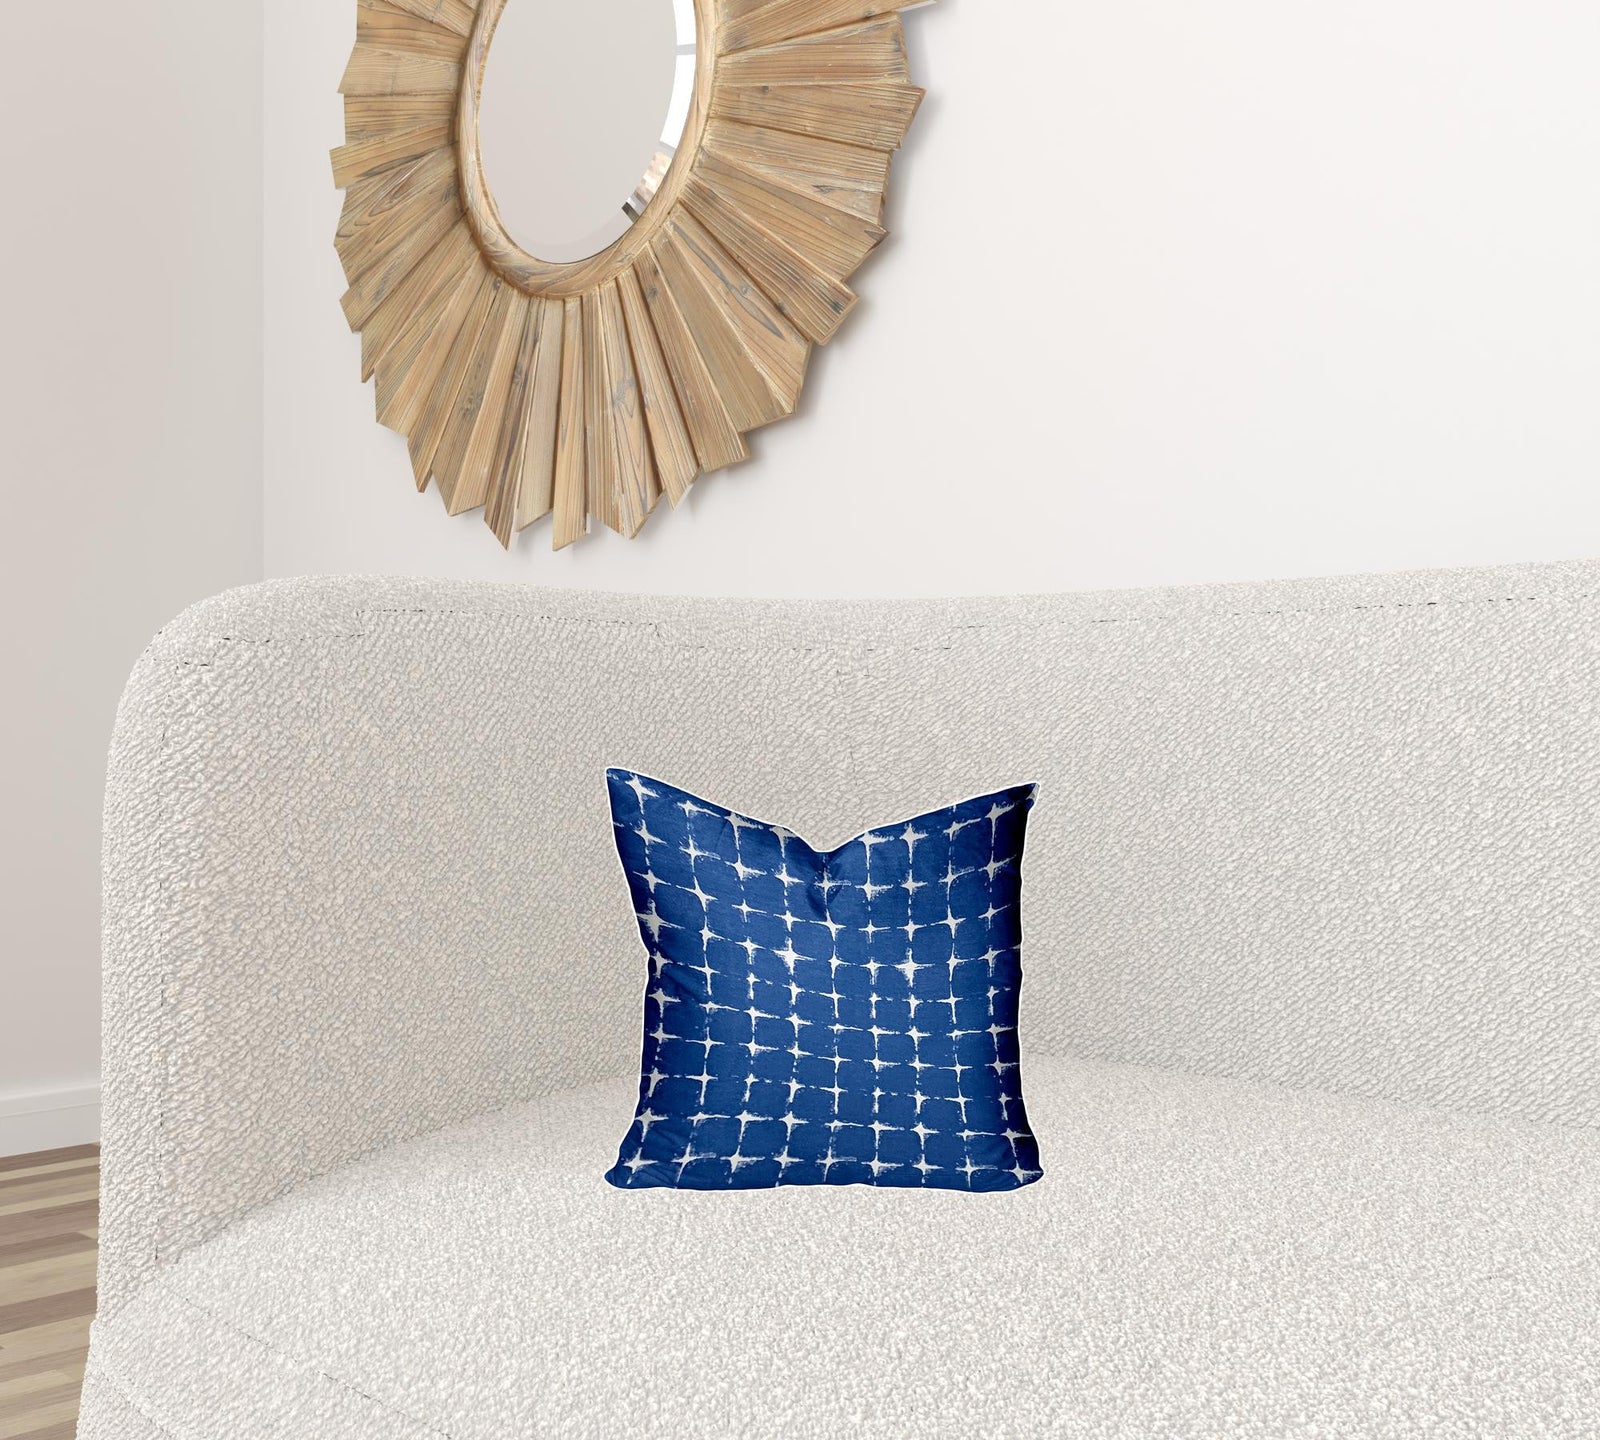 14" X 14" Blue And White Enveloped Gingham Throw Indoor Outdoor Pillow Cover